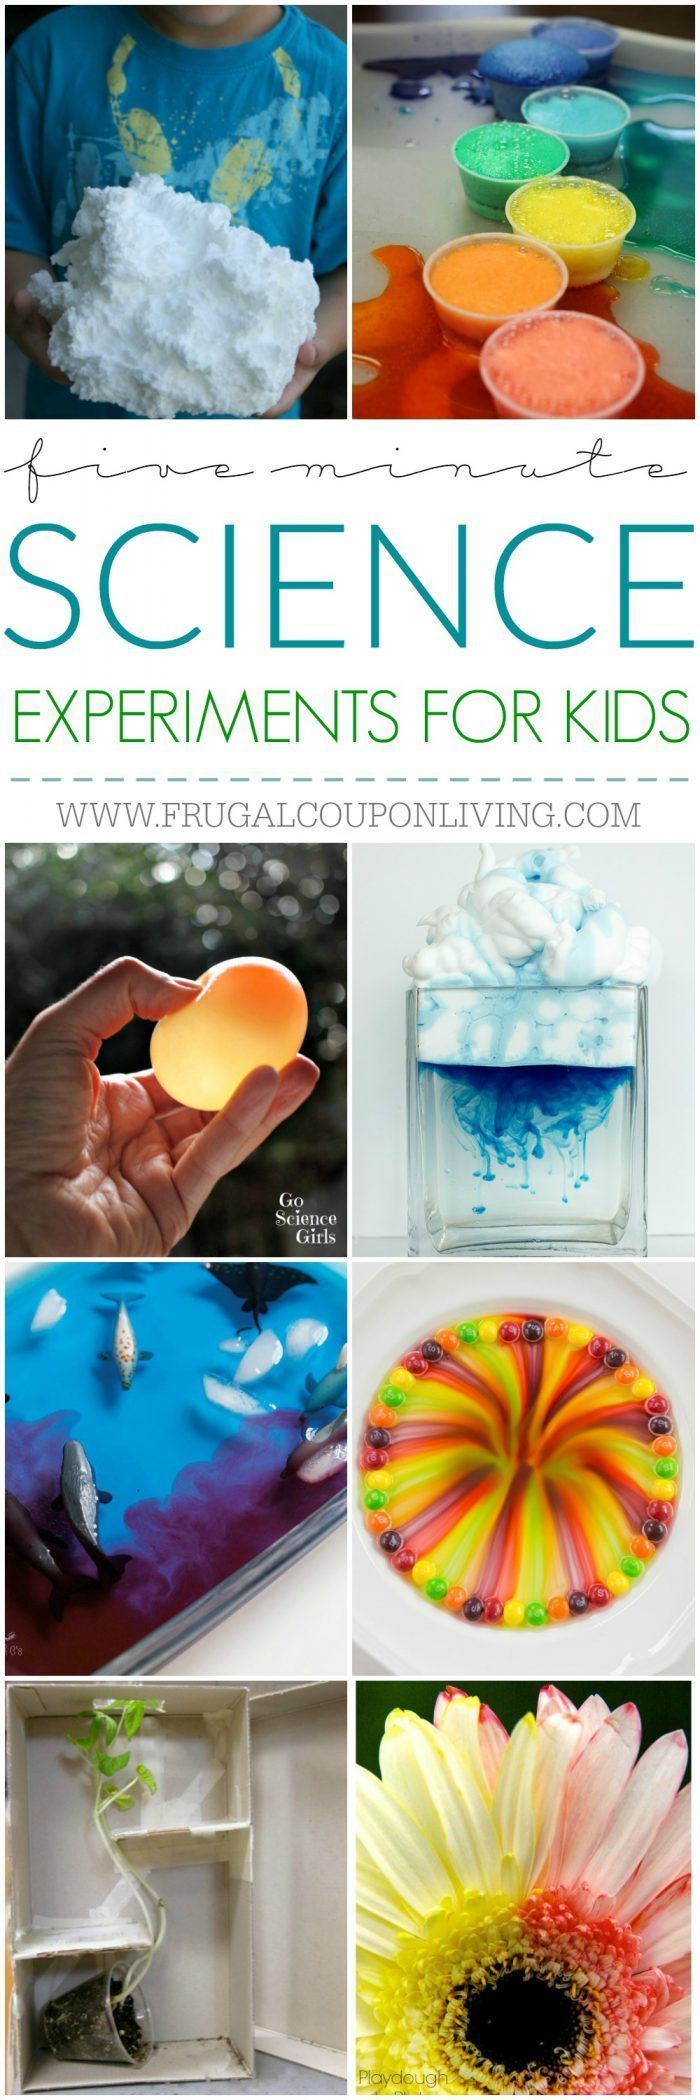 5 Minute Science Experiments for Kids and Busy Moms on Frugal Coupon Living. Geometric Bubbles, Glow in the Dark Volcanoes,